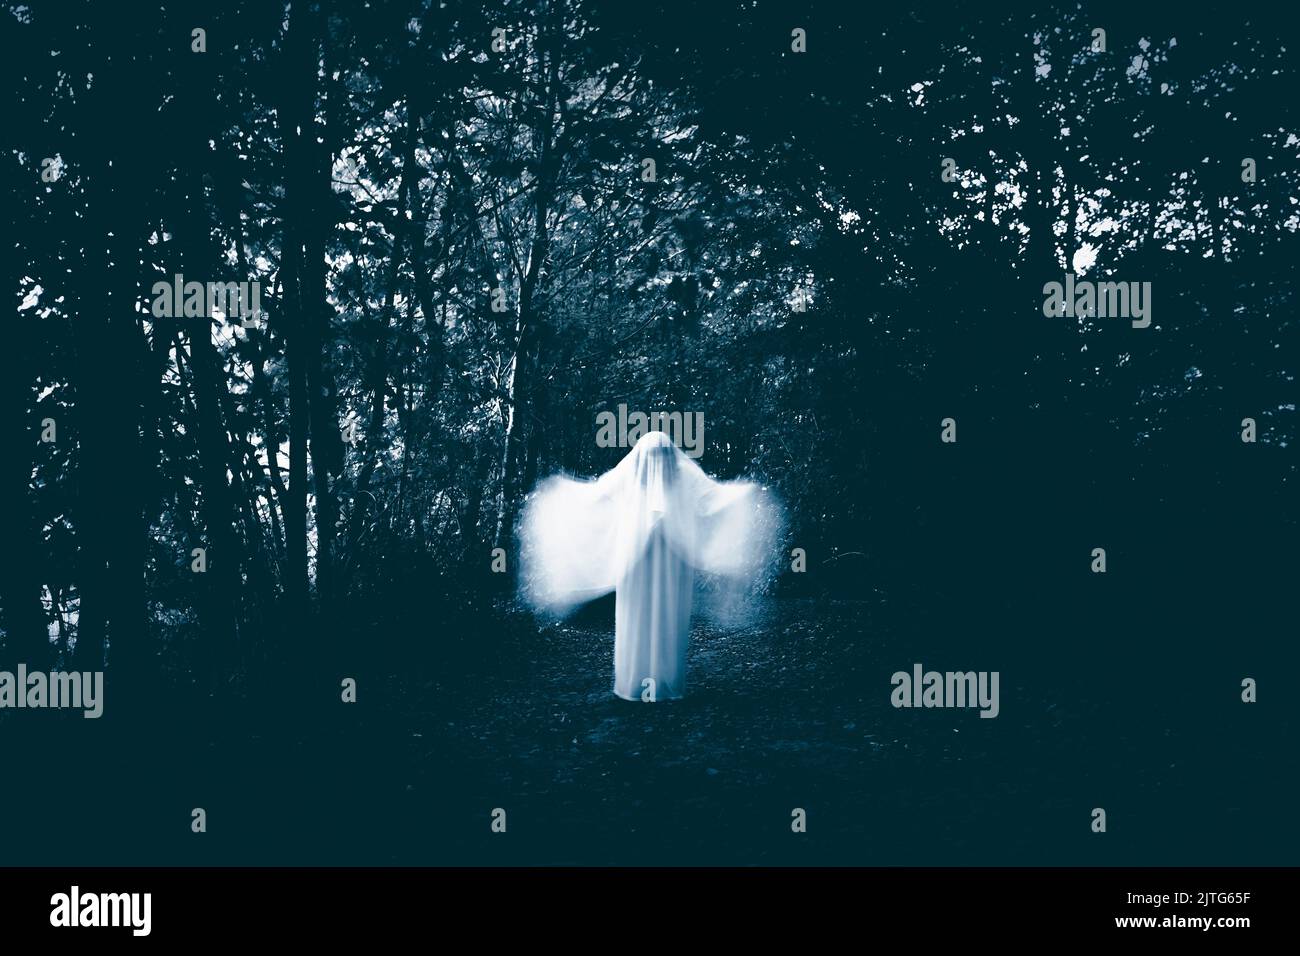 Horror background of a ghostly figure in enchanted a forest. Halloween concept Stock Photo